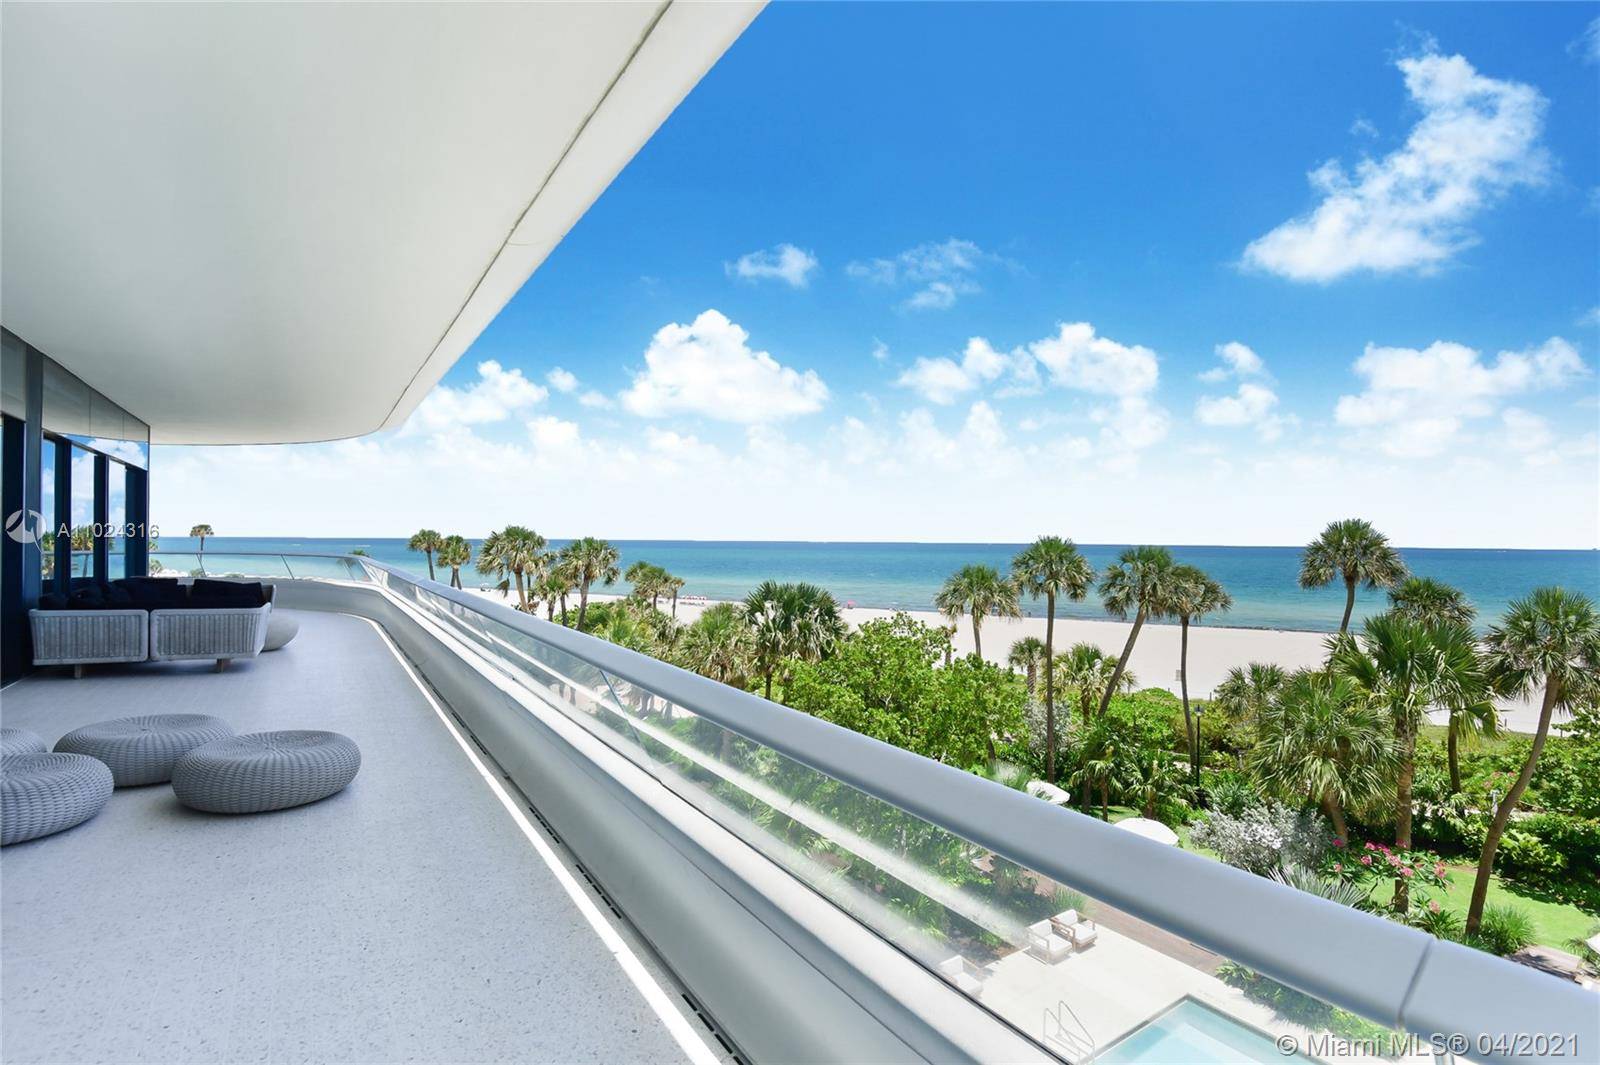 Faena House is the pinnacle of Miami Beach luxury and the A Line is the most coveted line in the building.